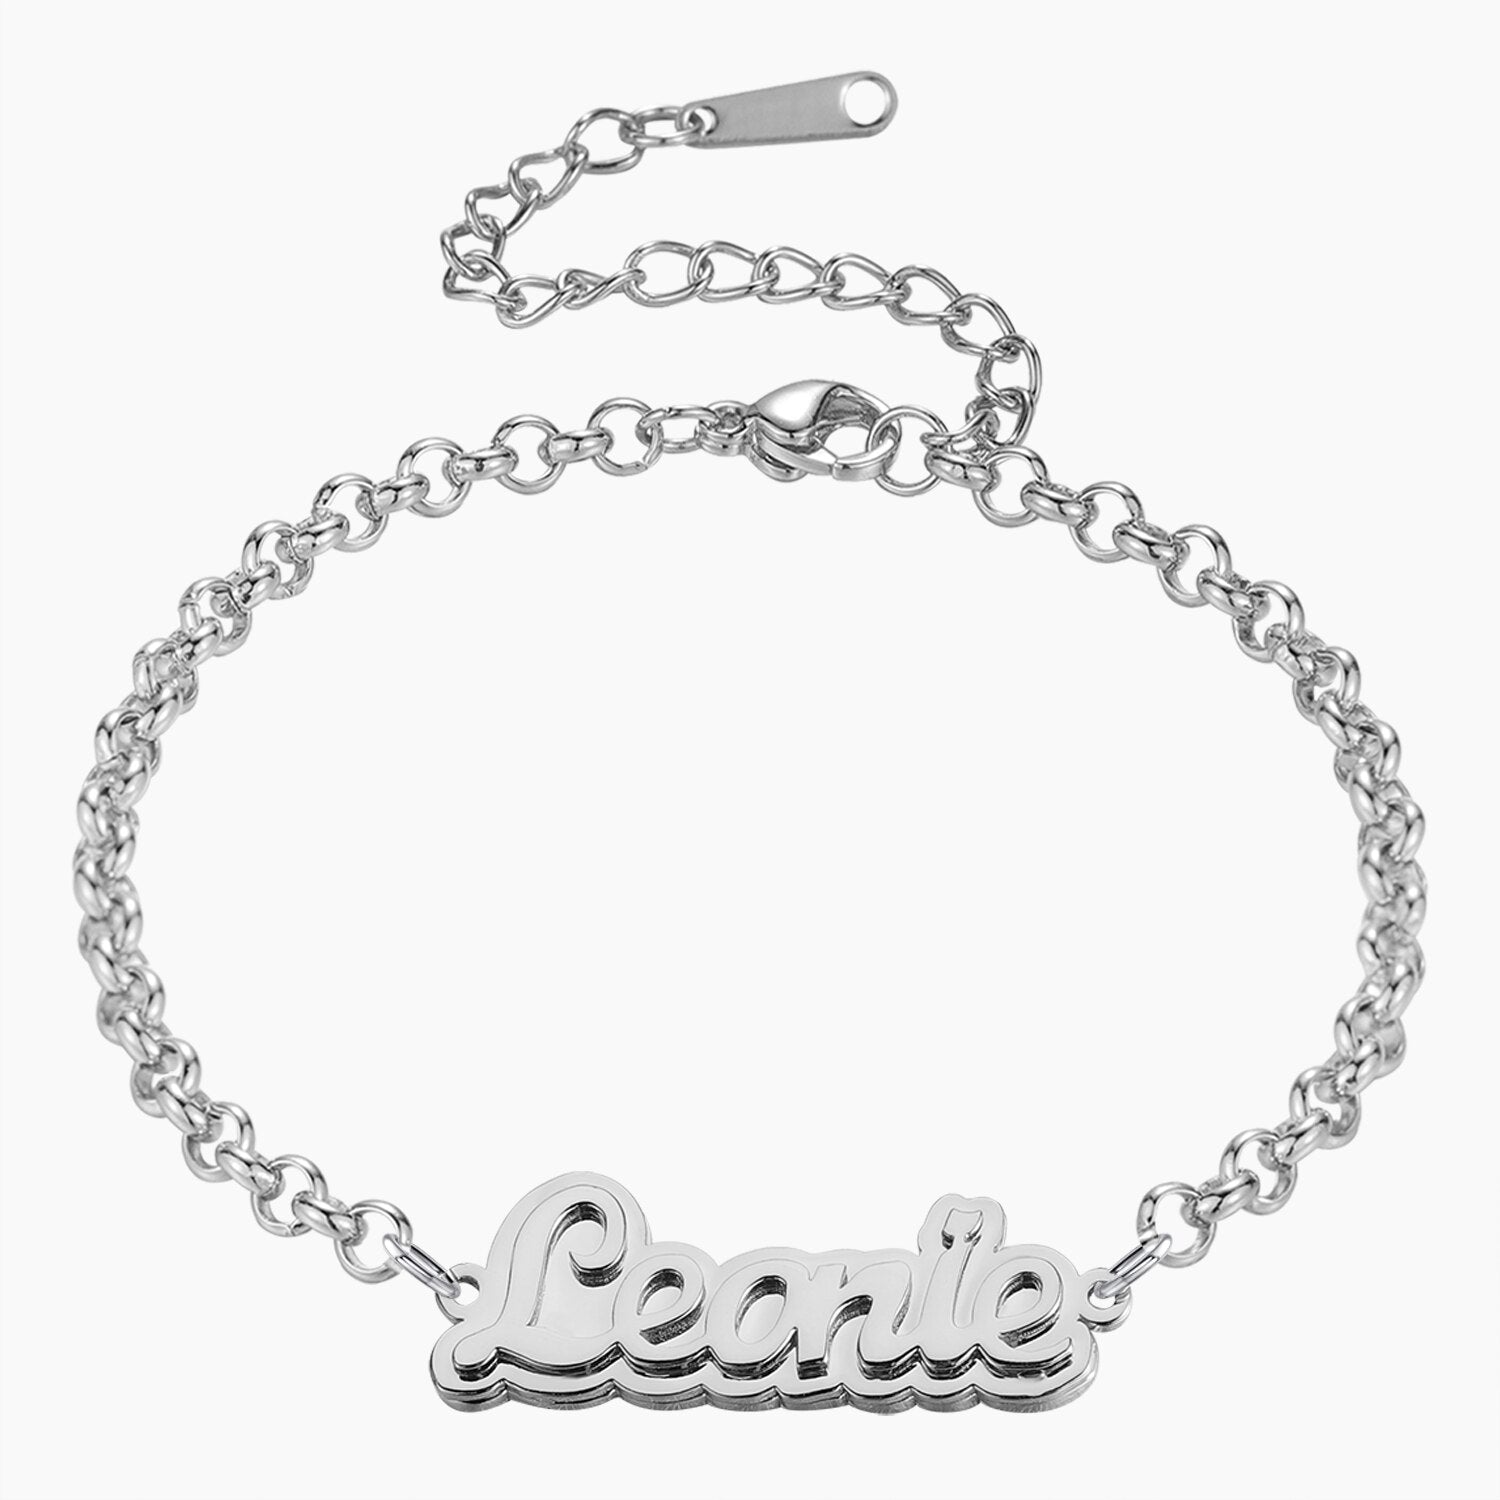 Personalised Magnetic Healing Therapy Bracelet silver